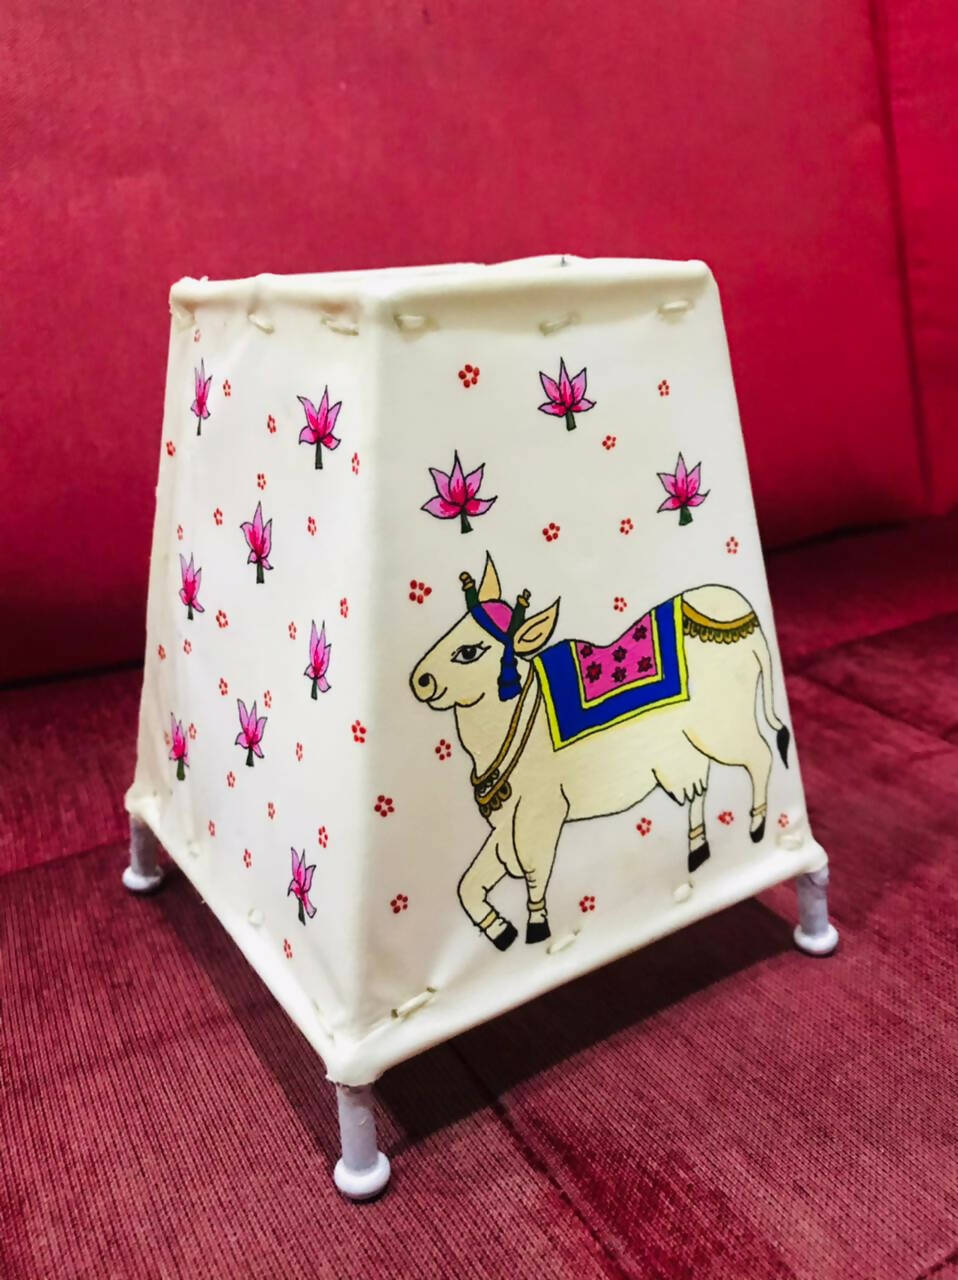 COW ART THOLU LAMP TL3 | HOUSE WARMING GIFTS| HOME DECOR| New Home Art | Housewarming Gift | Custom House Art | House Wall Art | Home Sweet Home | Gifts with Purpose BY DONE WITH LOVE